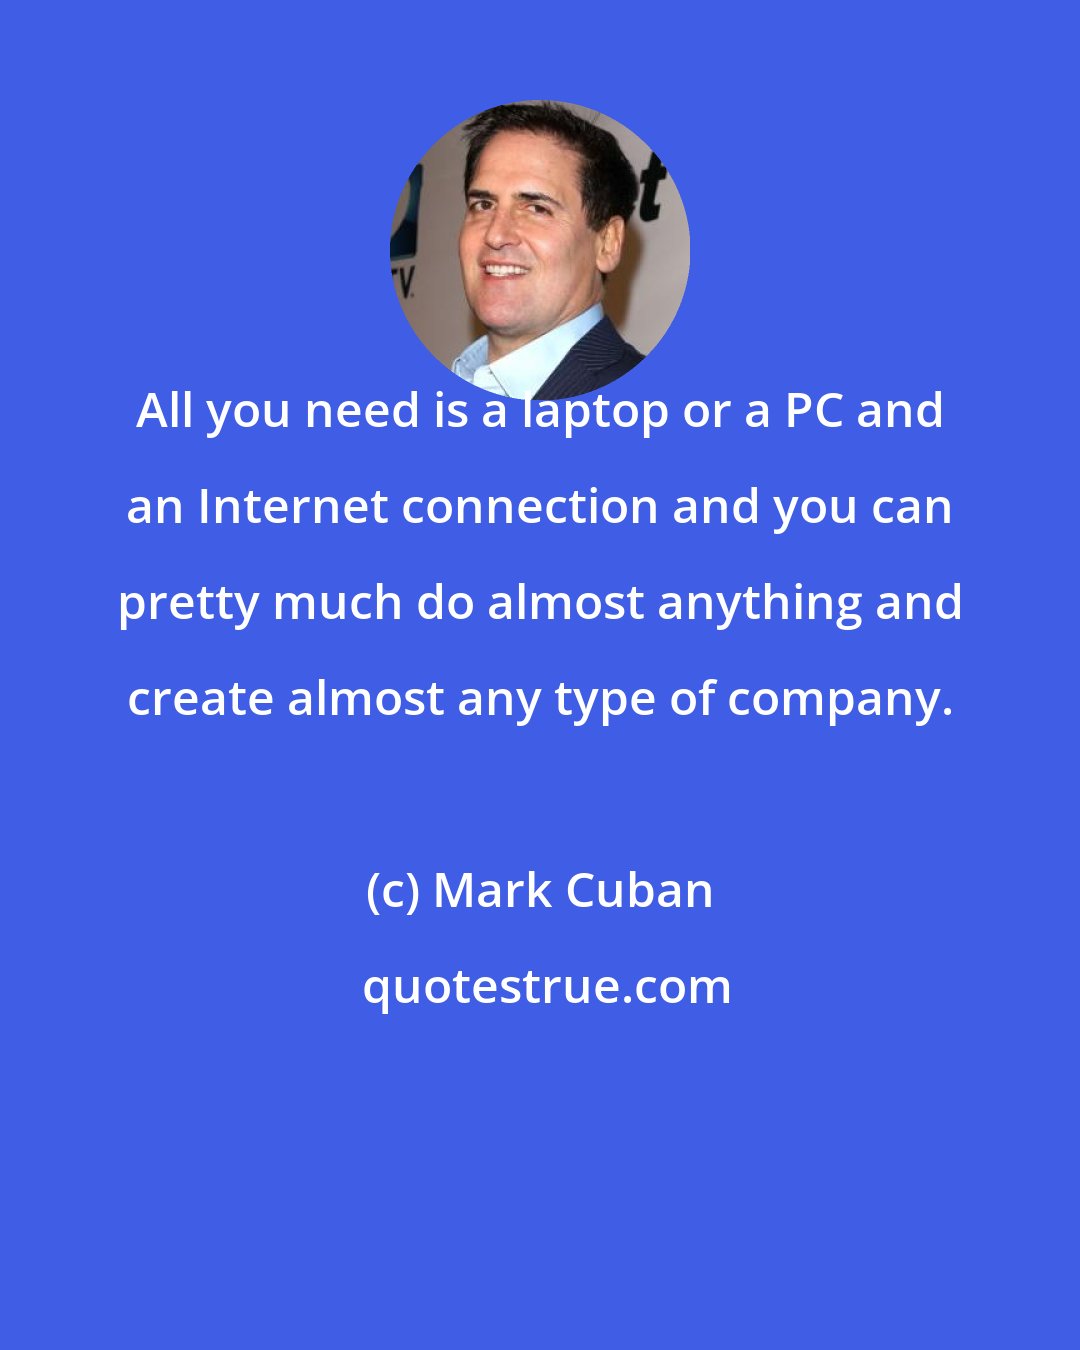 Mark Cuban: All you need is a laptop or a PC and an Internet connection and you can pretty much do almost anything and create almost any type of company.